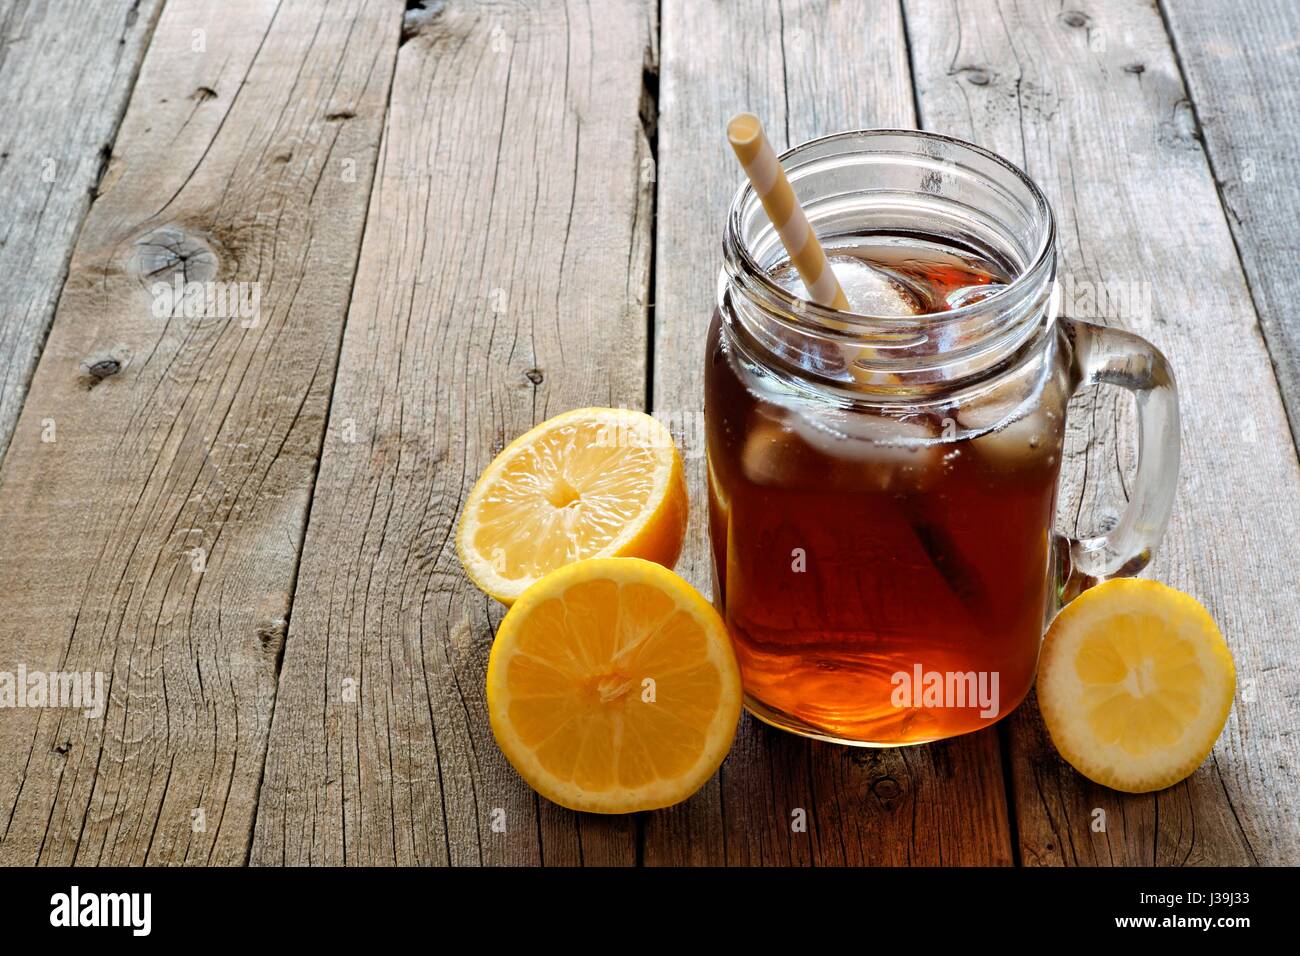 Mason jar glass of cold iced tea with lemon slices on a rustic wood background Stock Photo